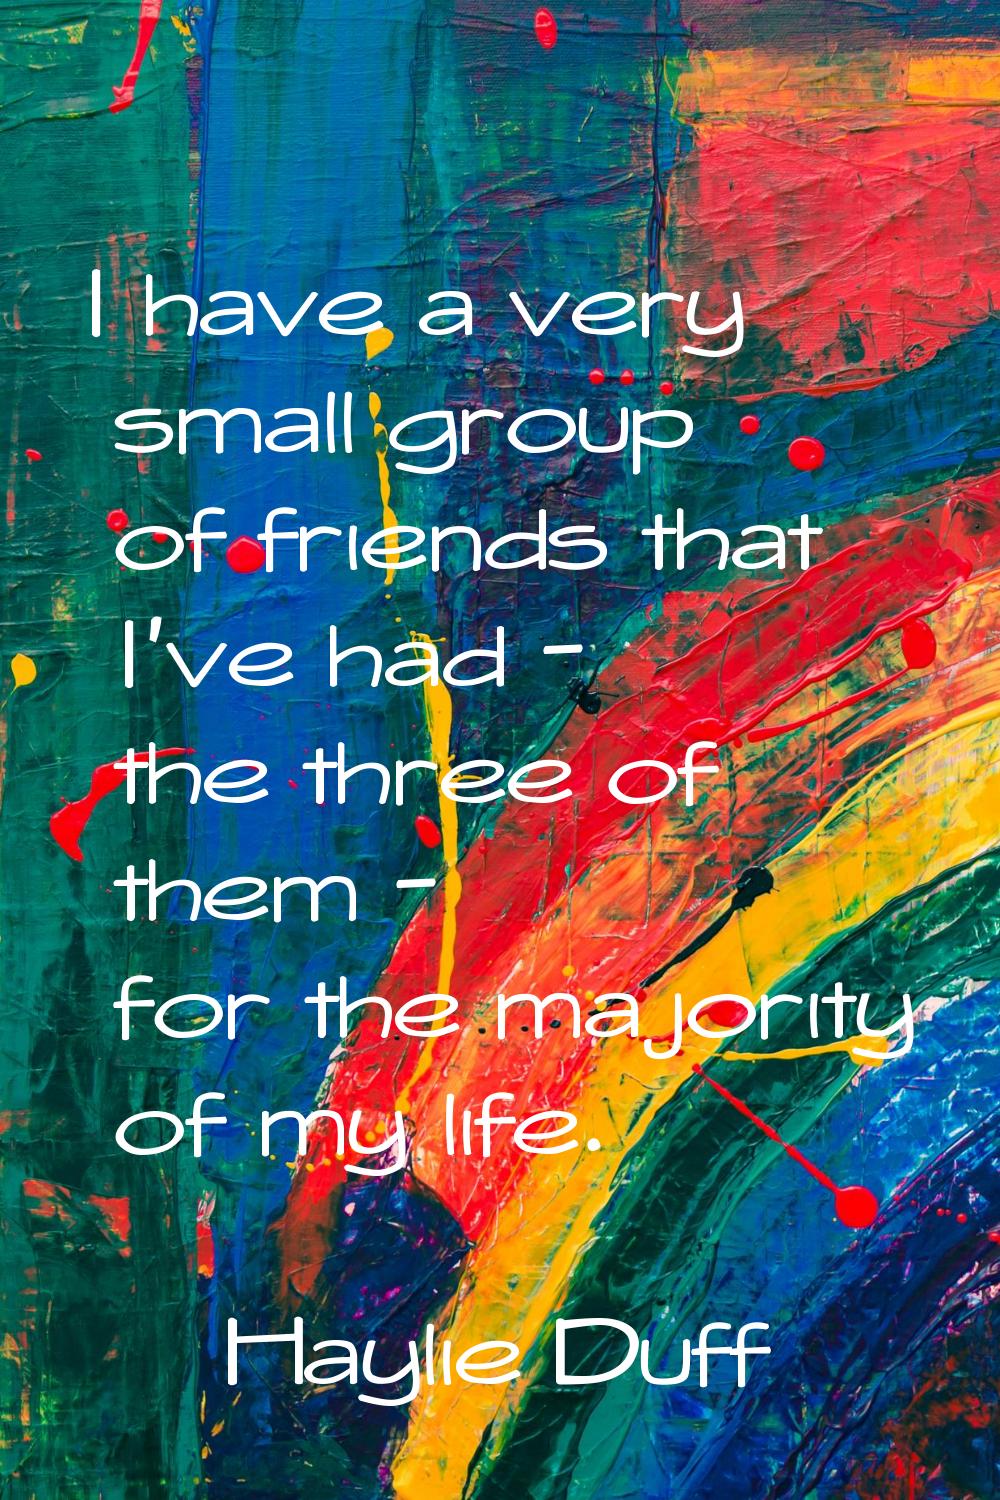 I have a very small group of friends that I've had - the three of them - for the majority of my lif